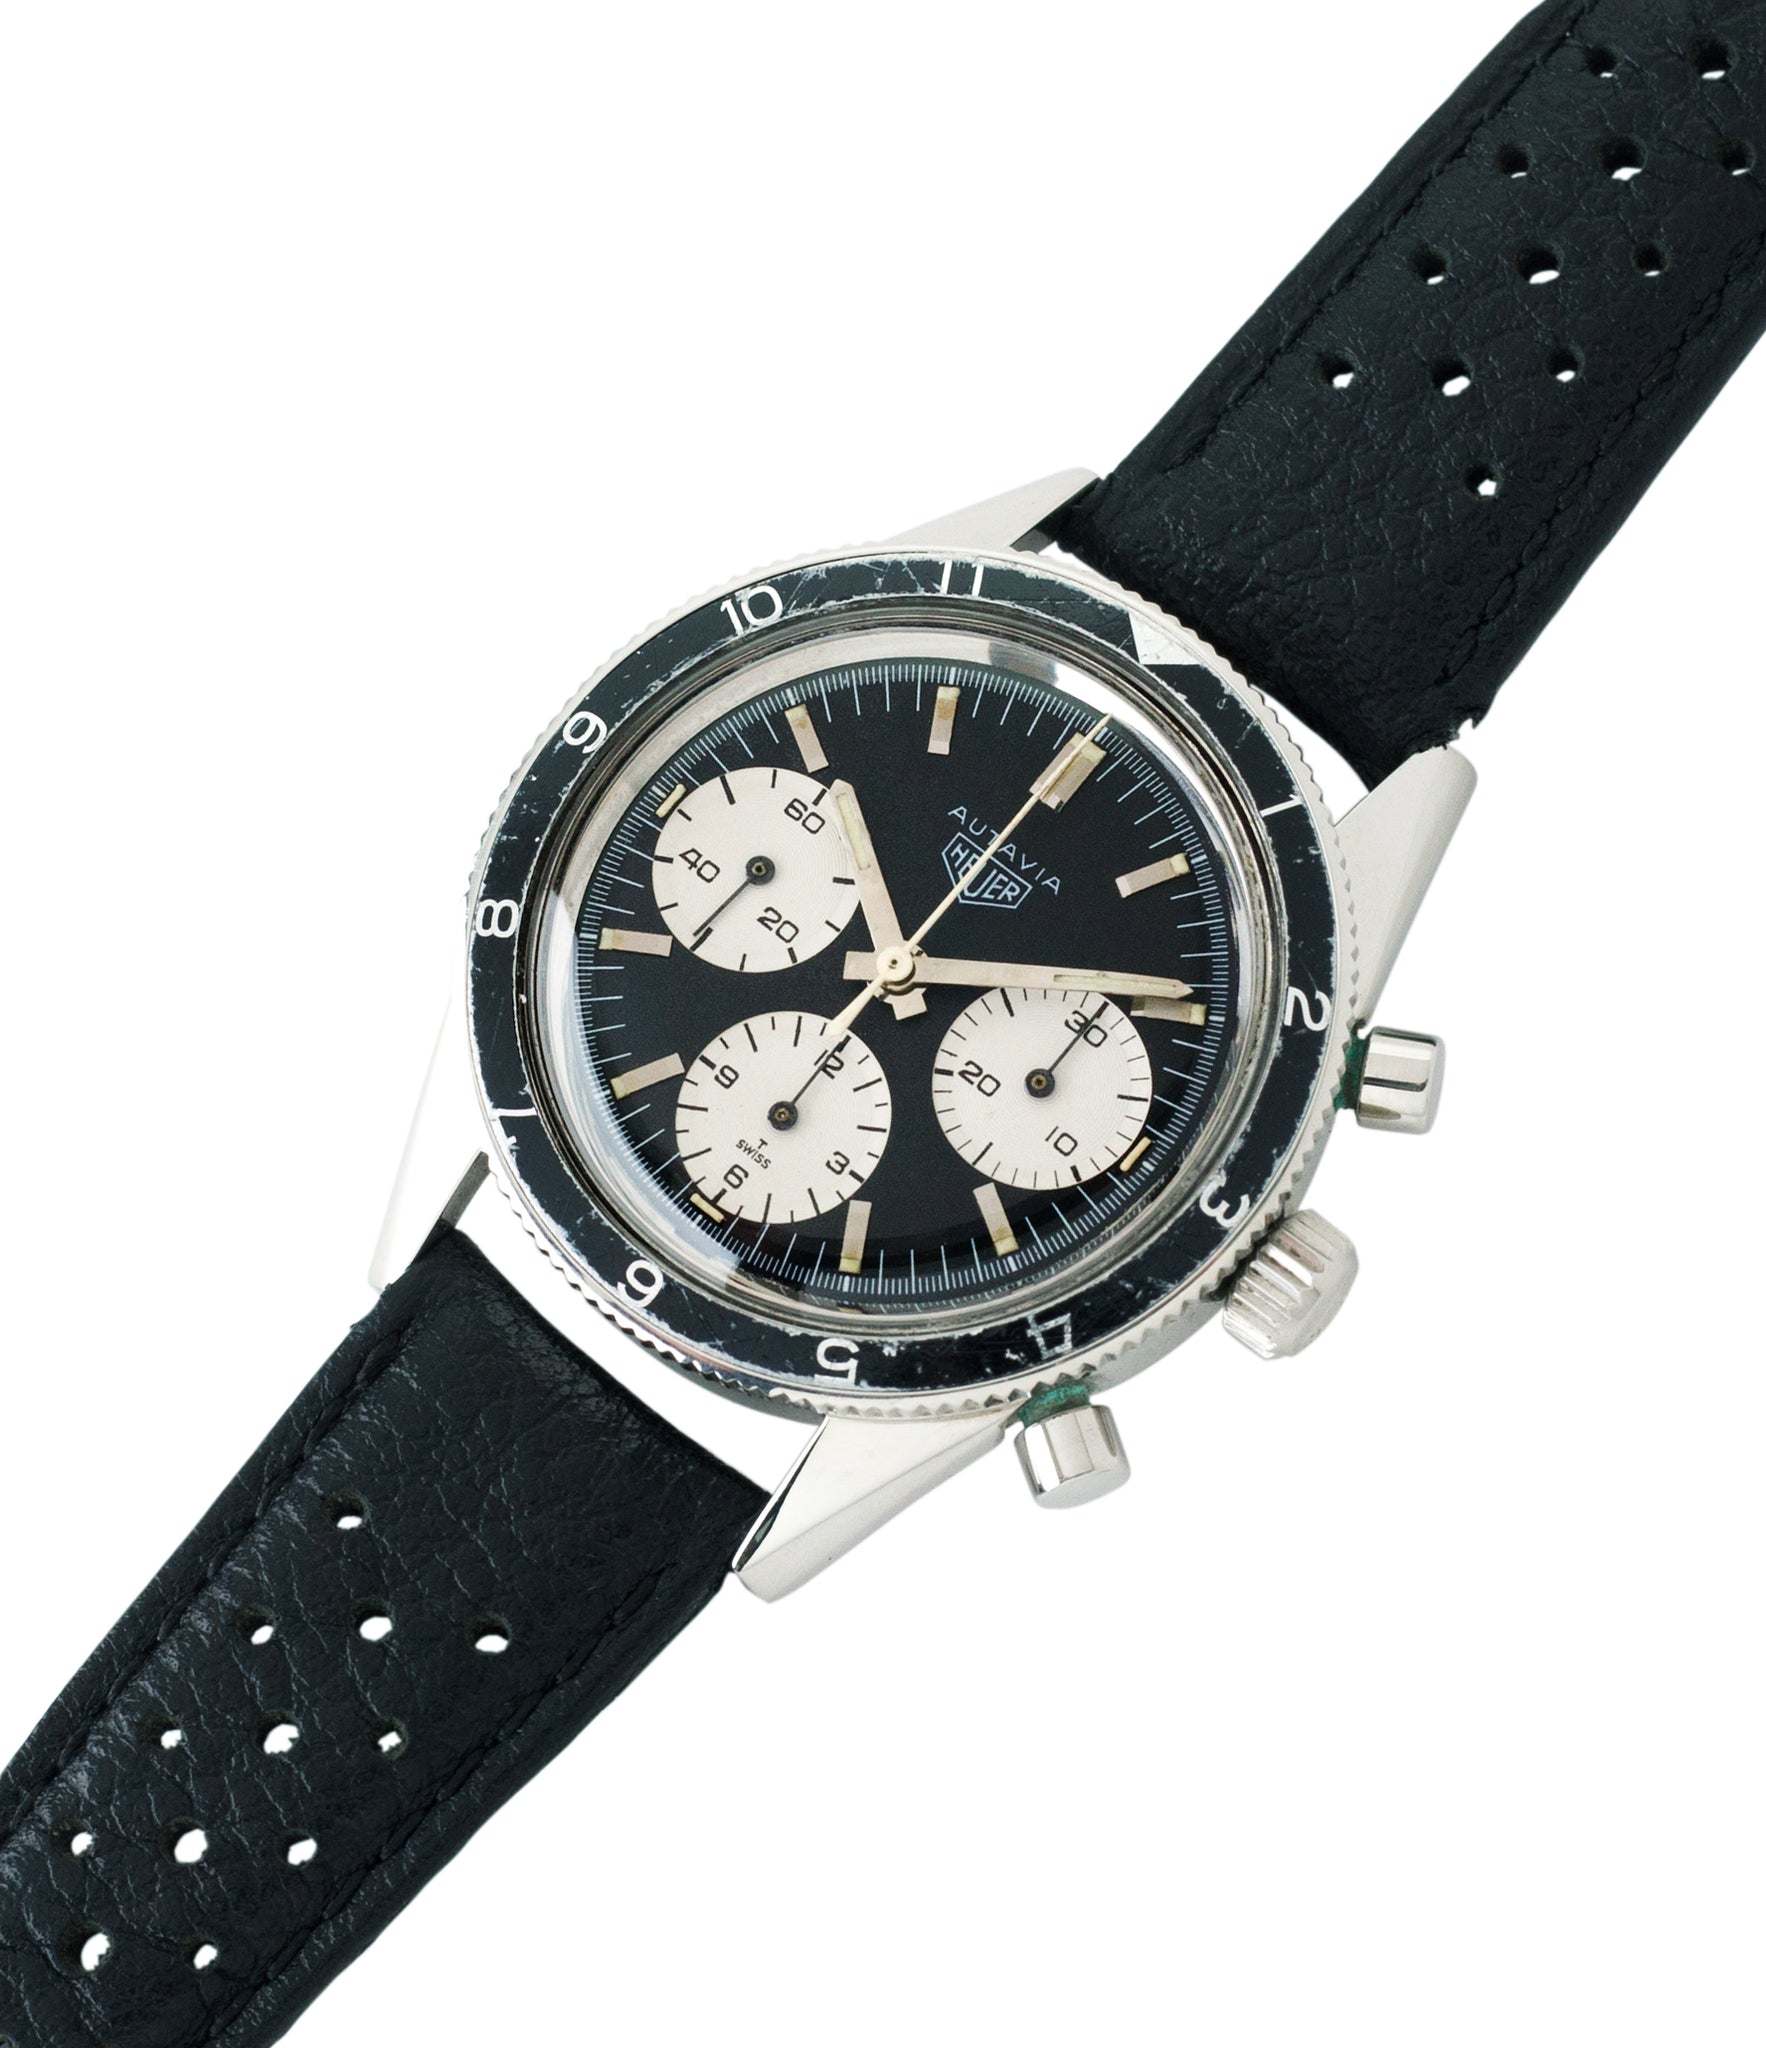 for sale vintage Heuer Autavia Rindt 2446 Valjoux 72 manual-winding steel sport chronograph watch for sale online at A Collected Man London UK vintage rare watch specialist